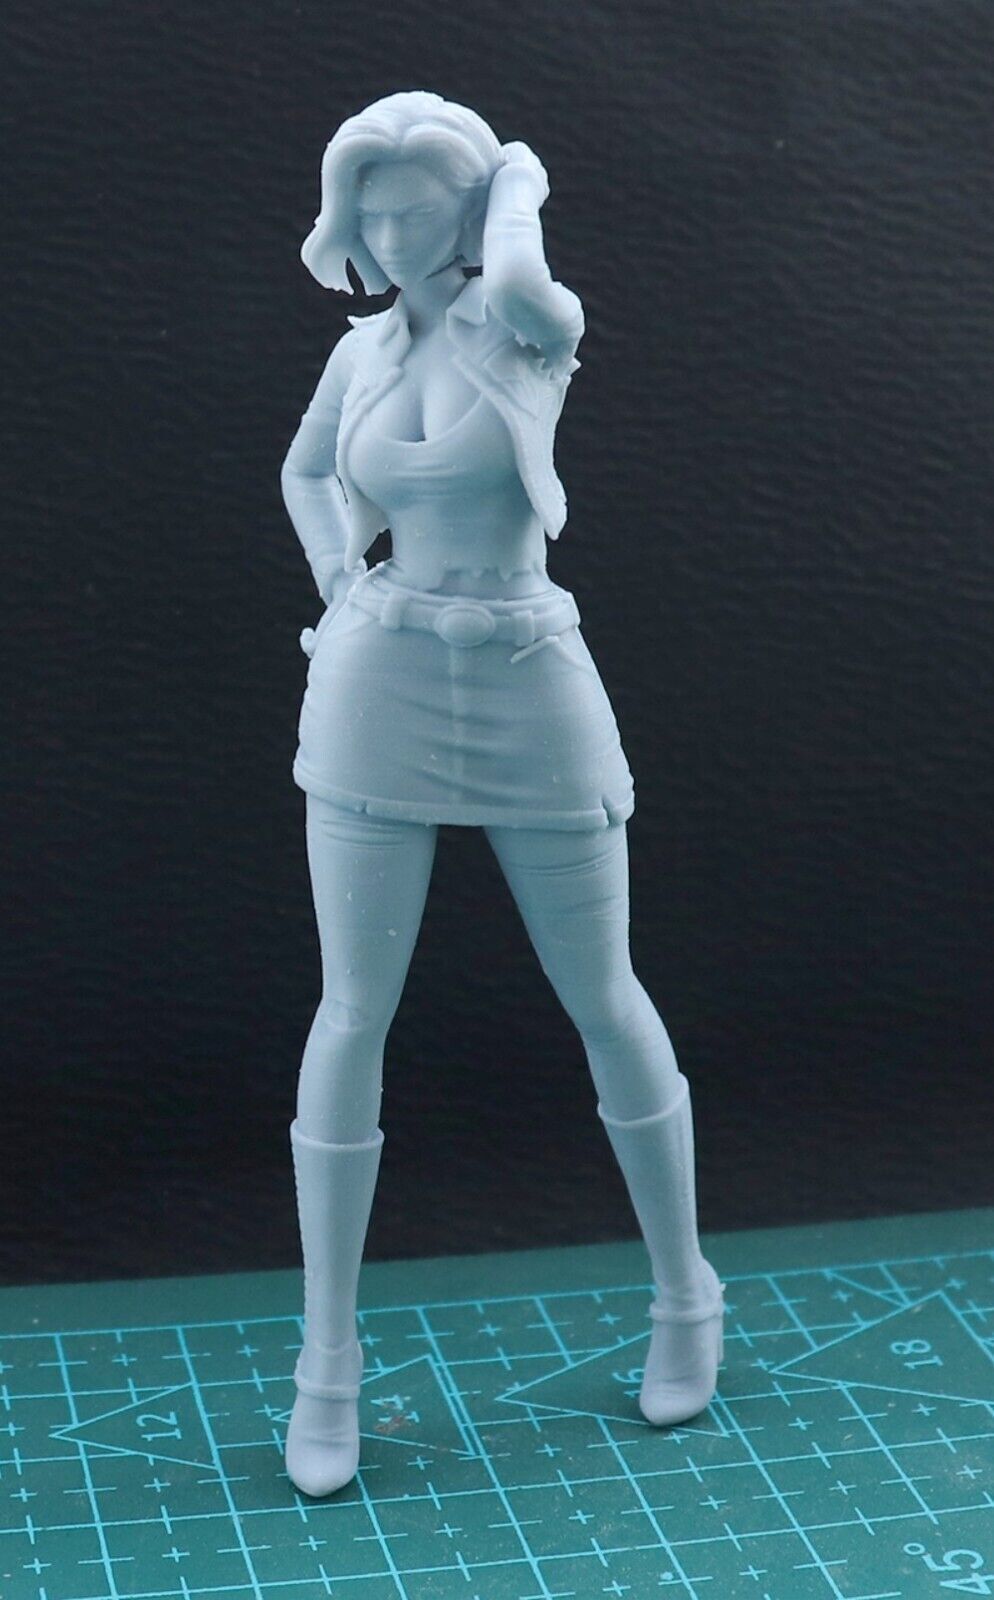 Awesome 1/24 Resin Figure Model Fantasy Anime Girl 3d Printing Unassembled Unpainted New on eBay